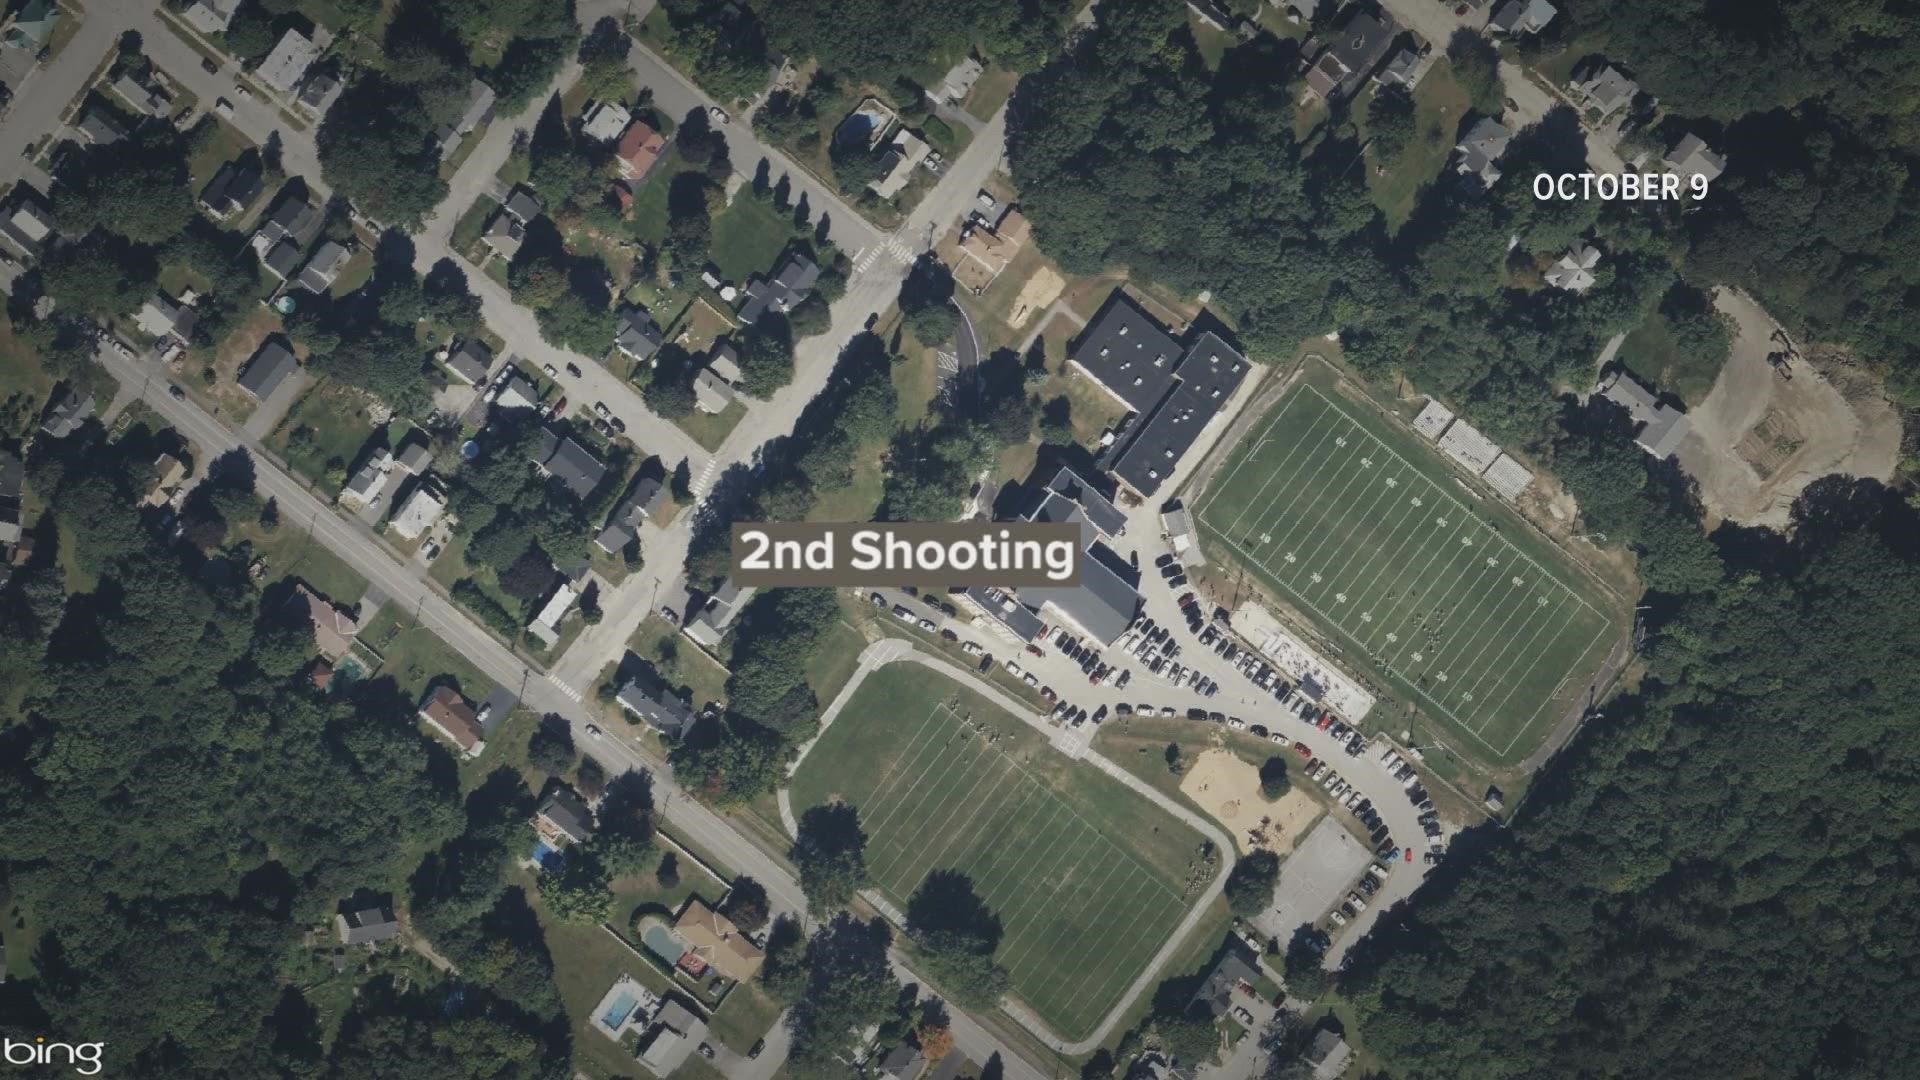 Auburn police said they have arrested a 15-year-old boy from Lewiston in connection with two recent shootings in Auburn.